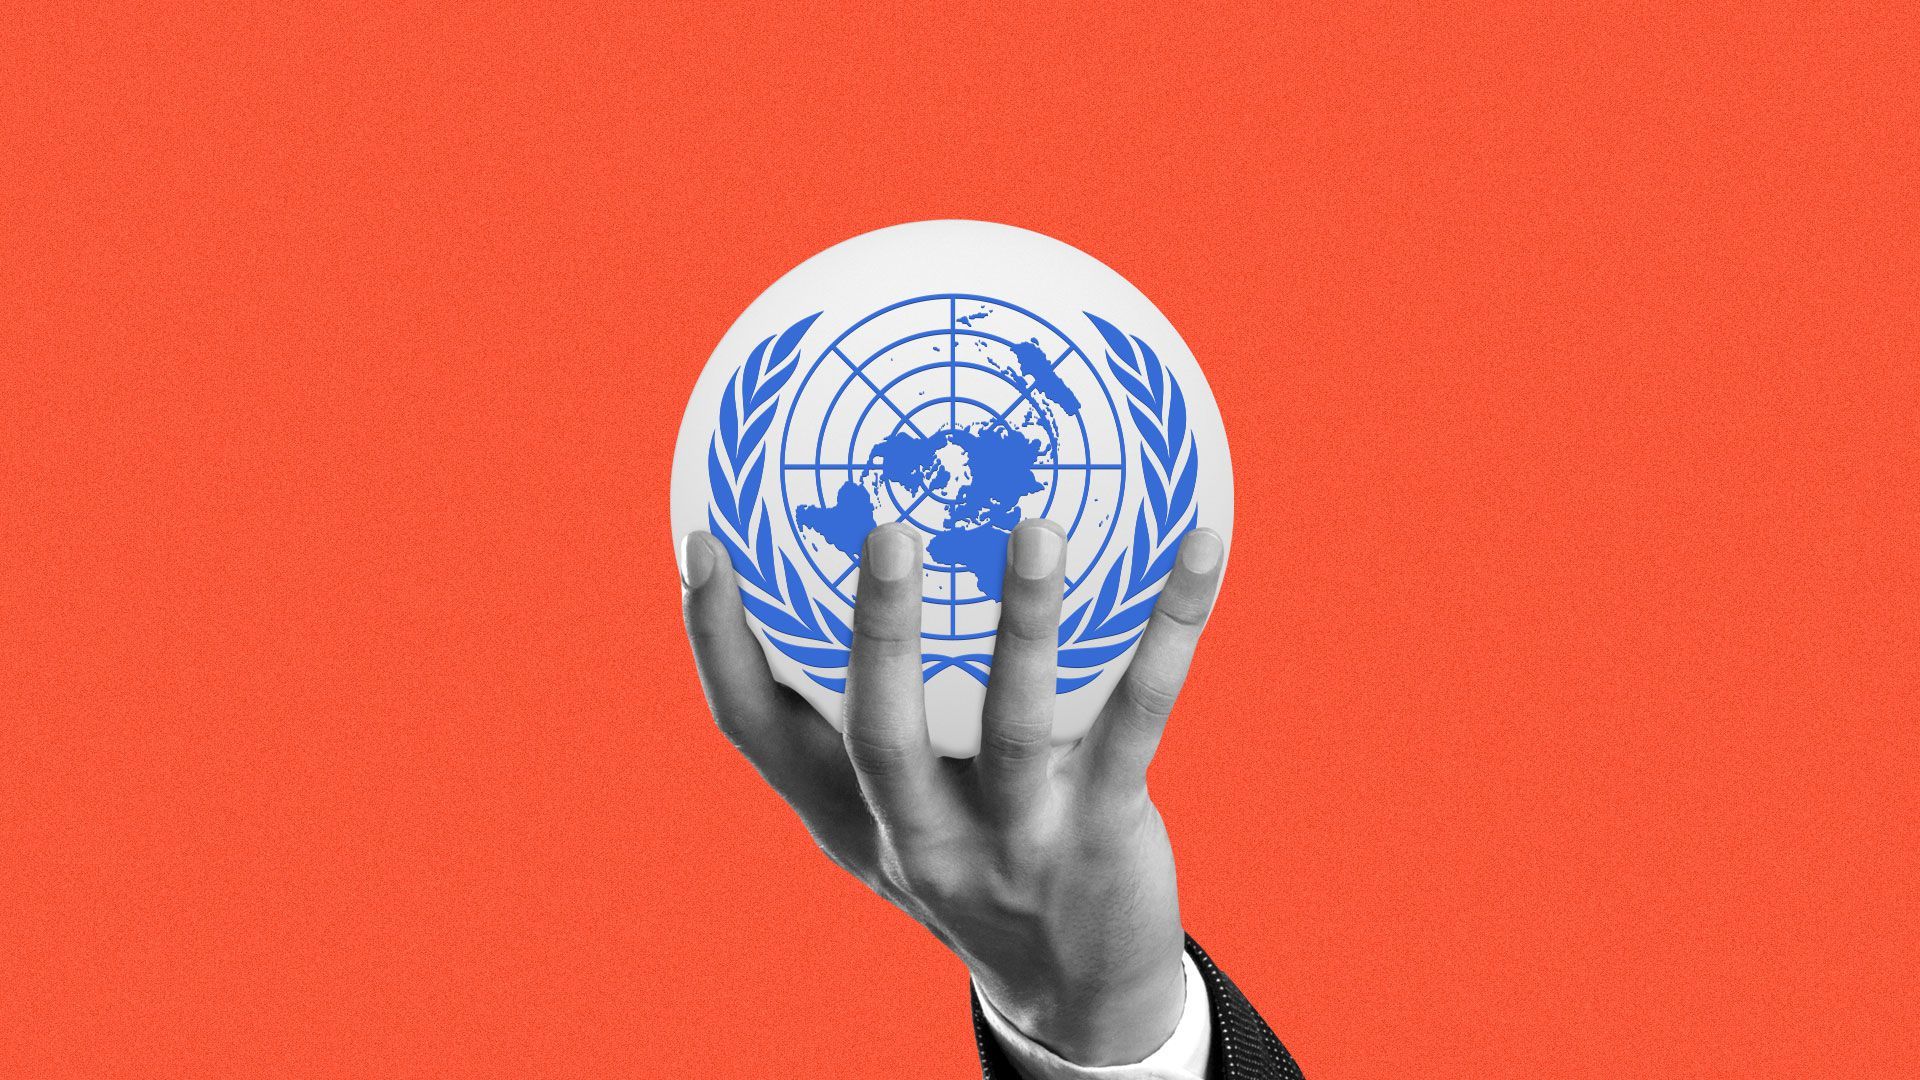 Illustration of a hand holding up a sphere with the United Nations logo